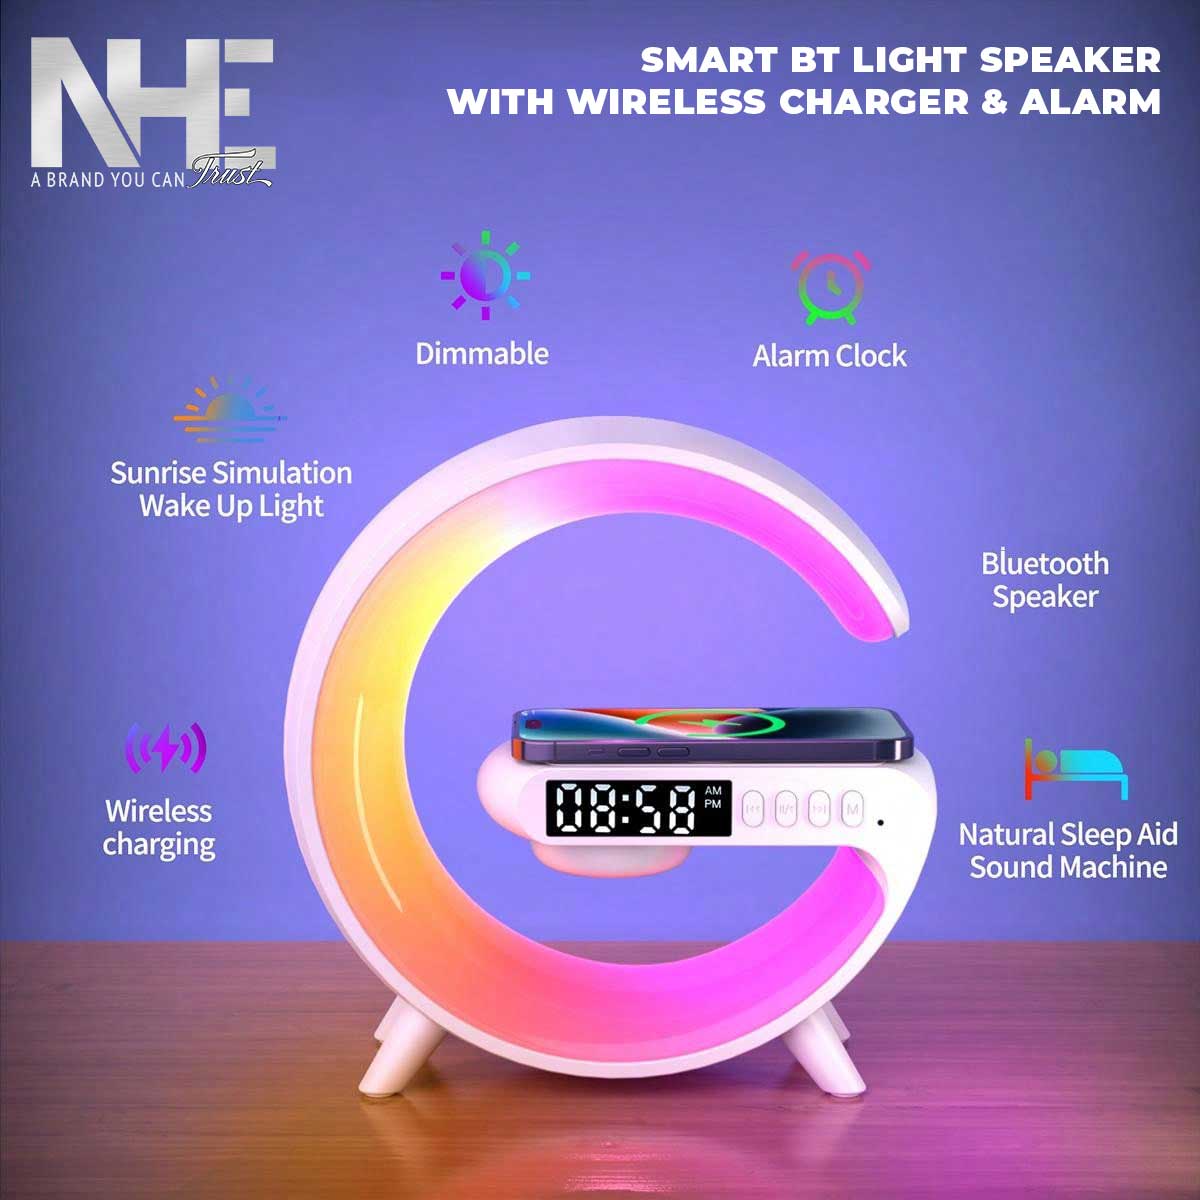 Smart BT Light Speaker With Wireless Charger & Alarm